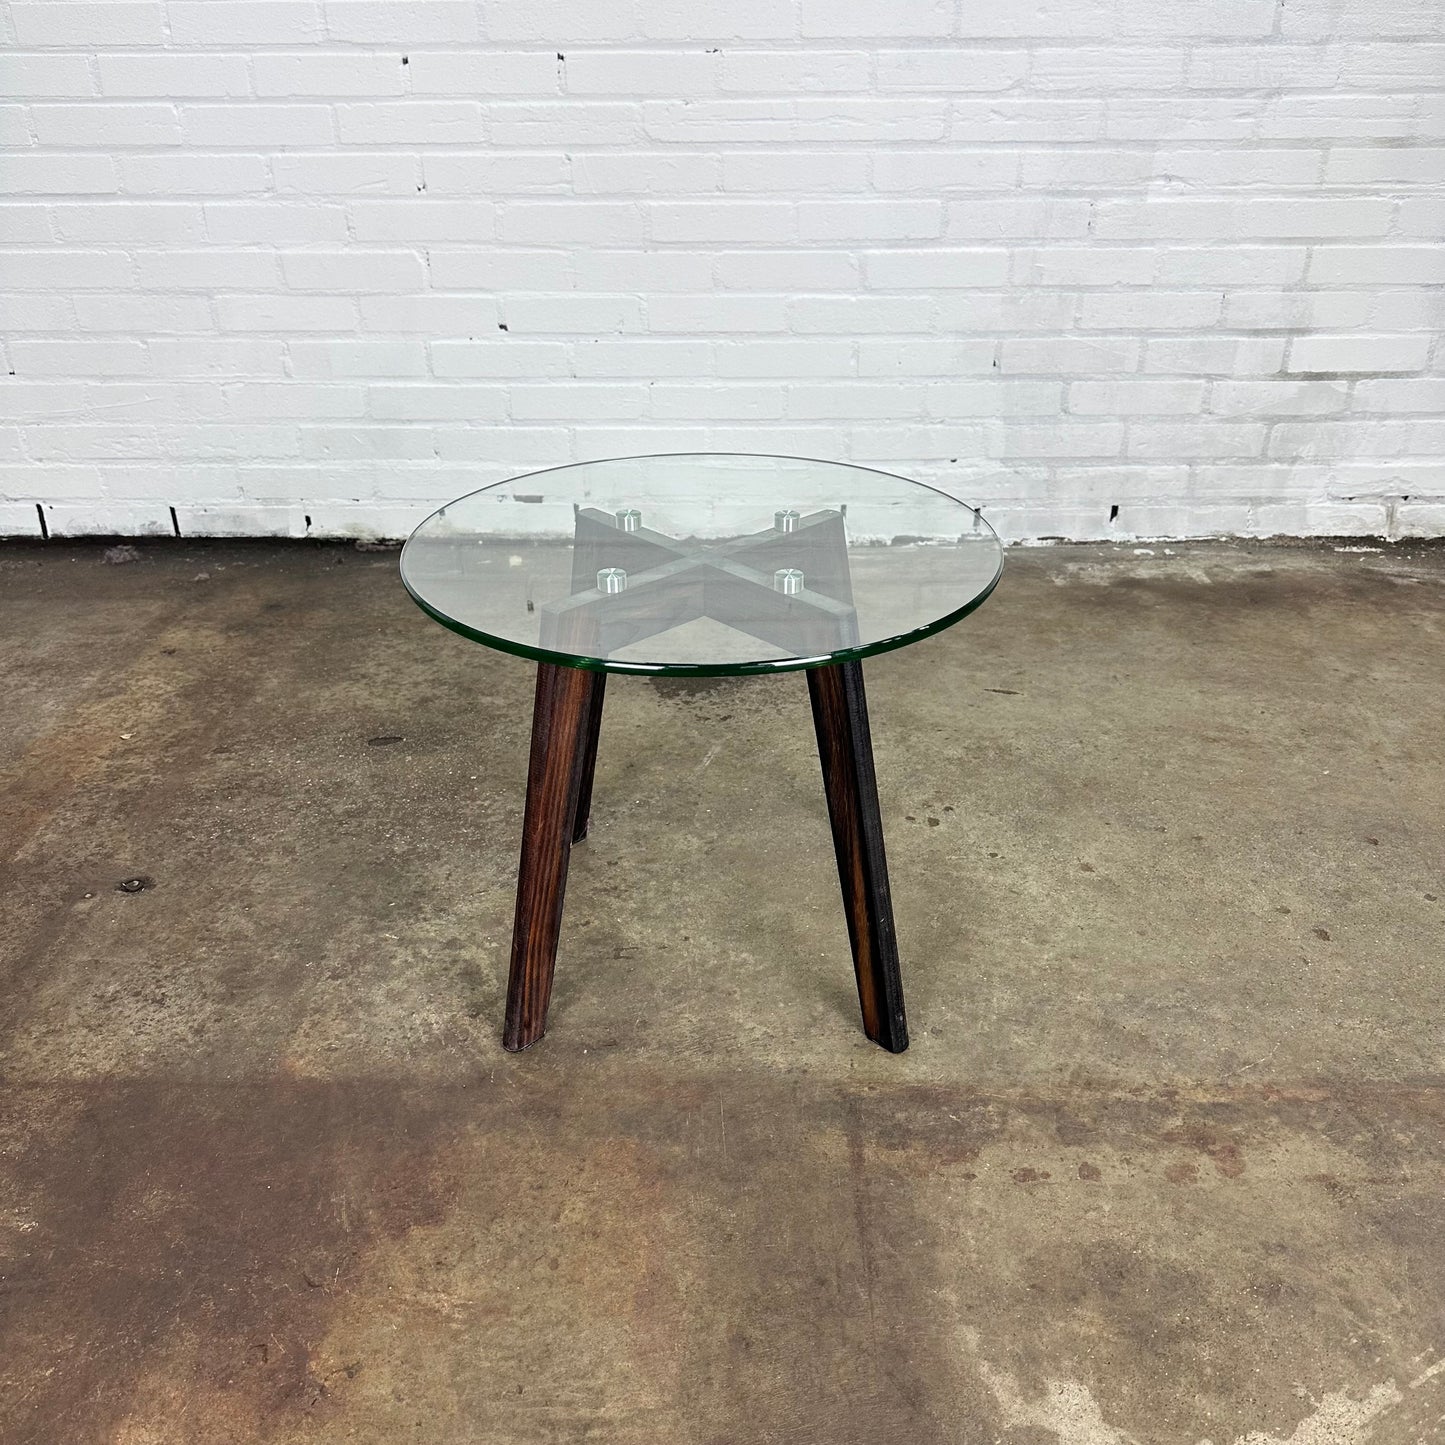 Vintage side table with wooden base